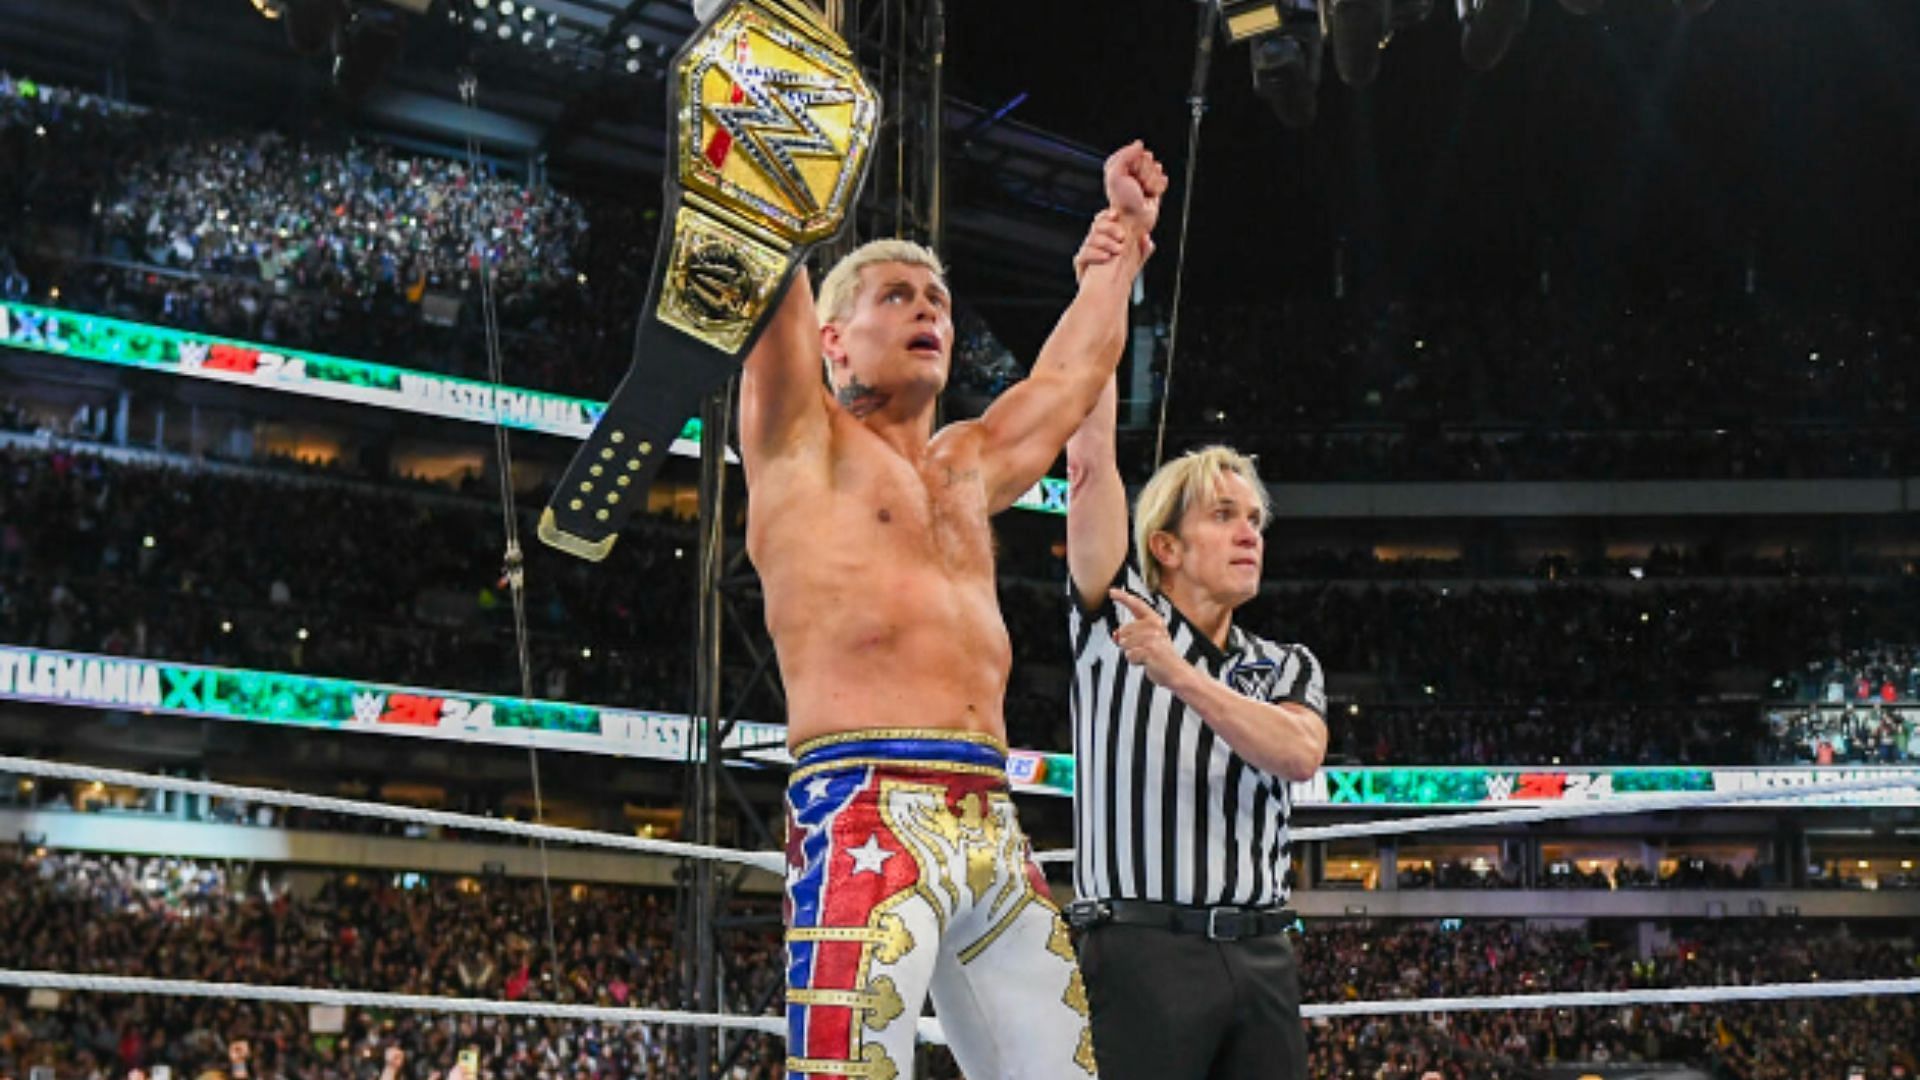 Cody Rhodes finished the story at WrestleMania XL [Image Credits: WWE